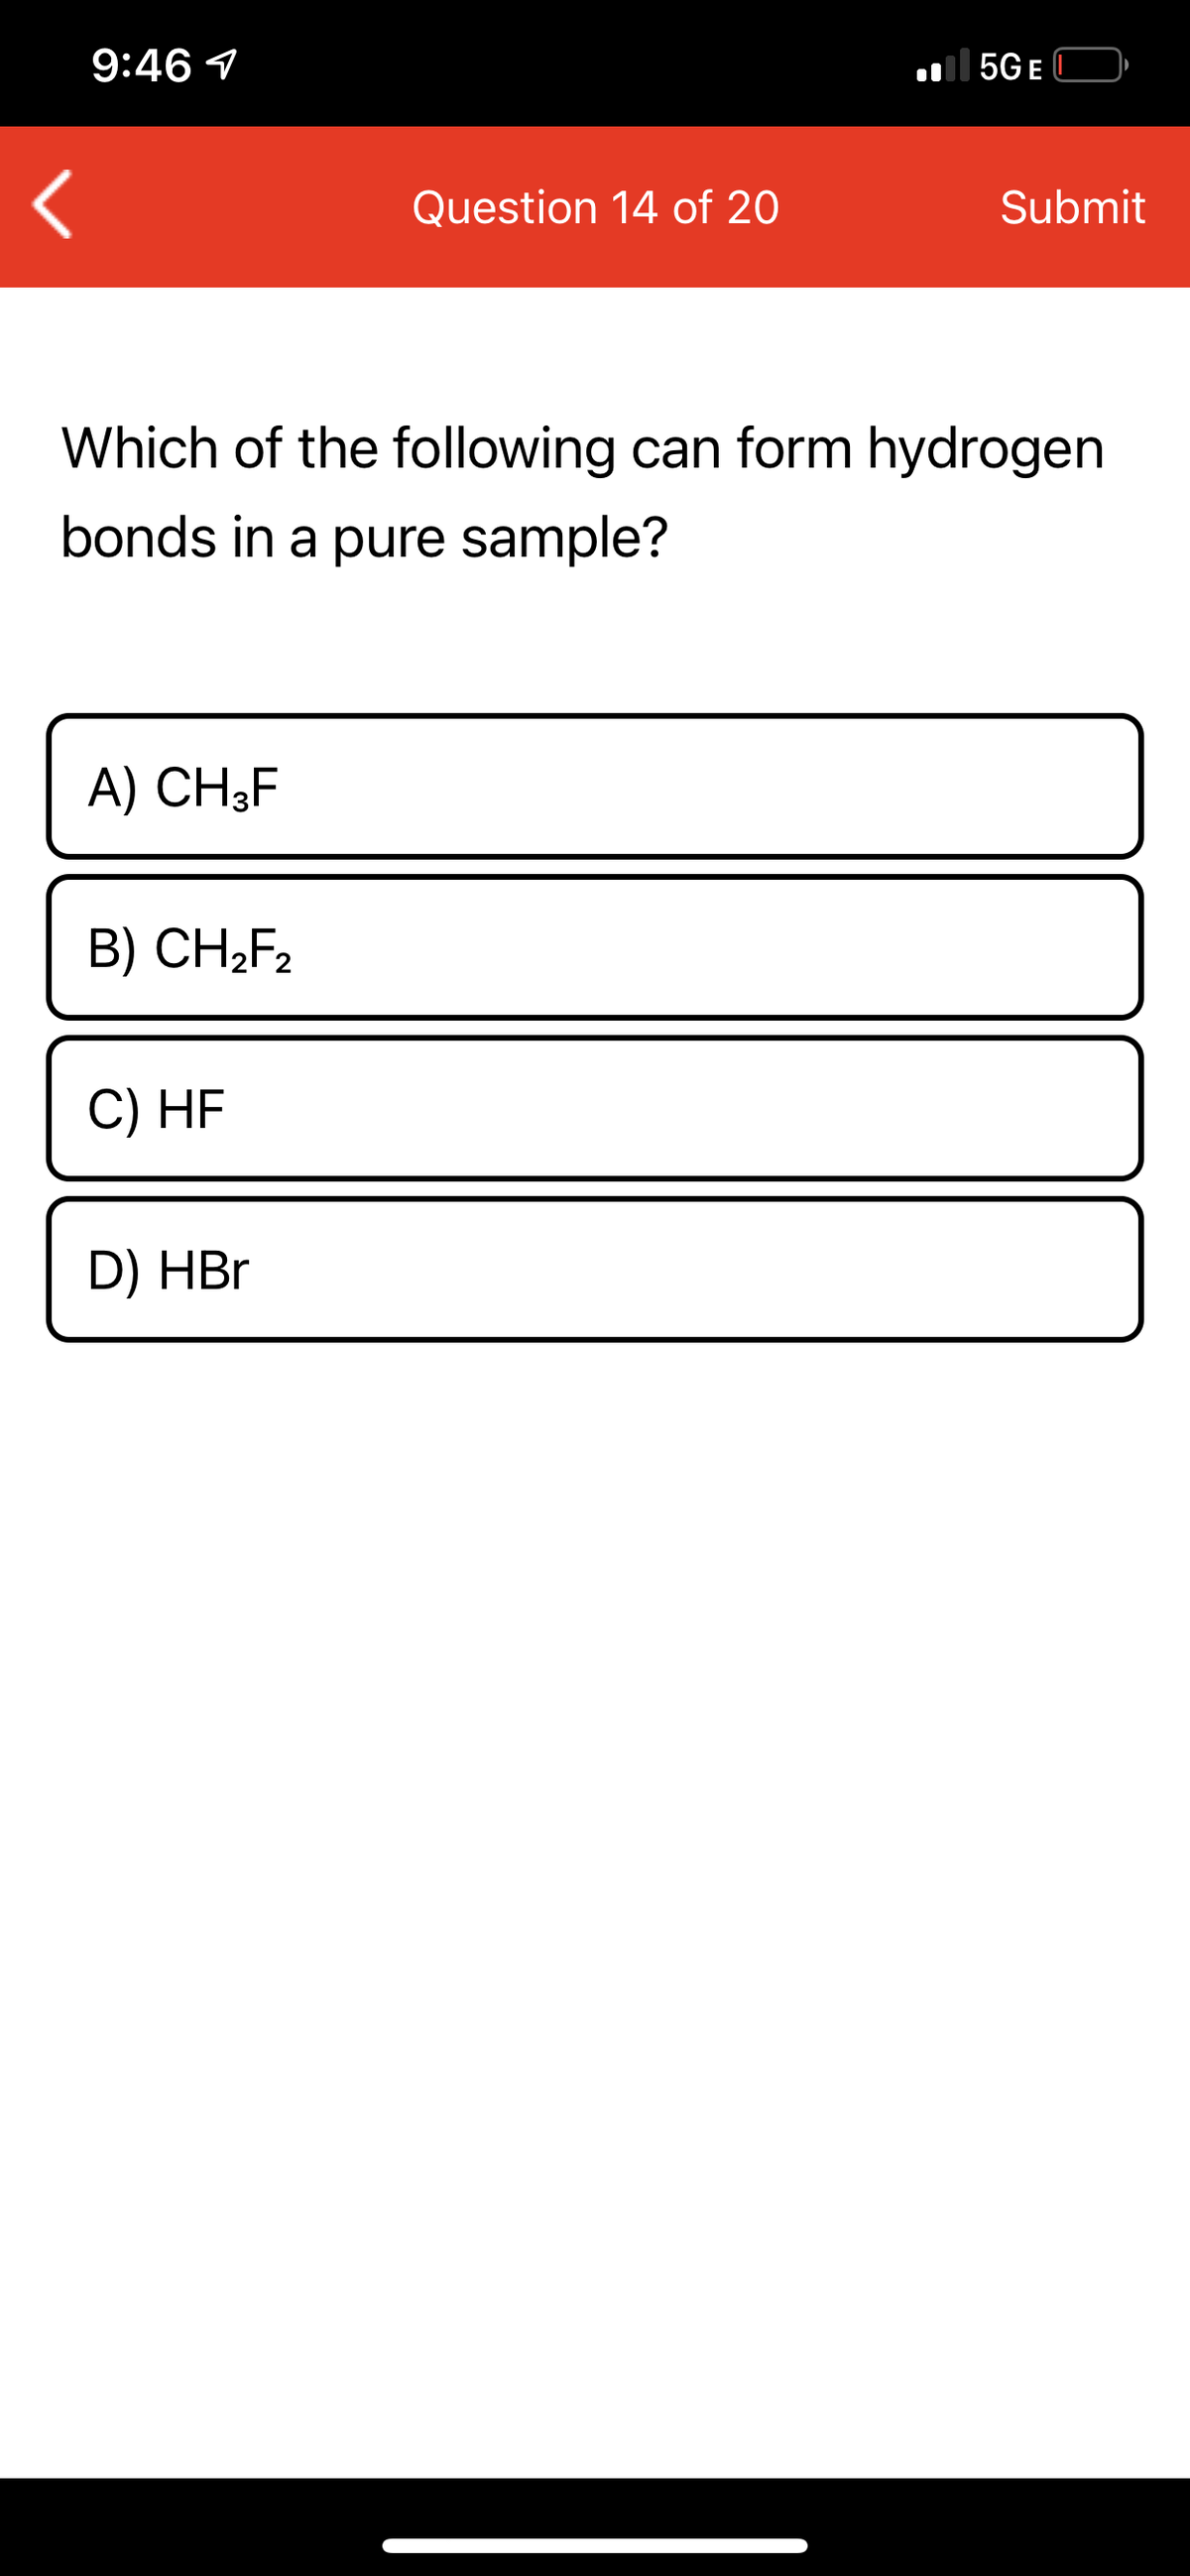 9:46 1
| 5G E
Question 14 of 20
Submit
Which of the following can form hydrogen
bonds in a pure sample?
A) CH3F
B) CH;F2
C) HF
D) HBr
